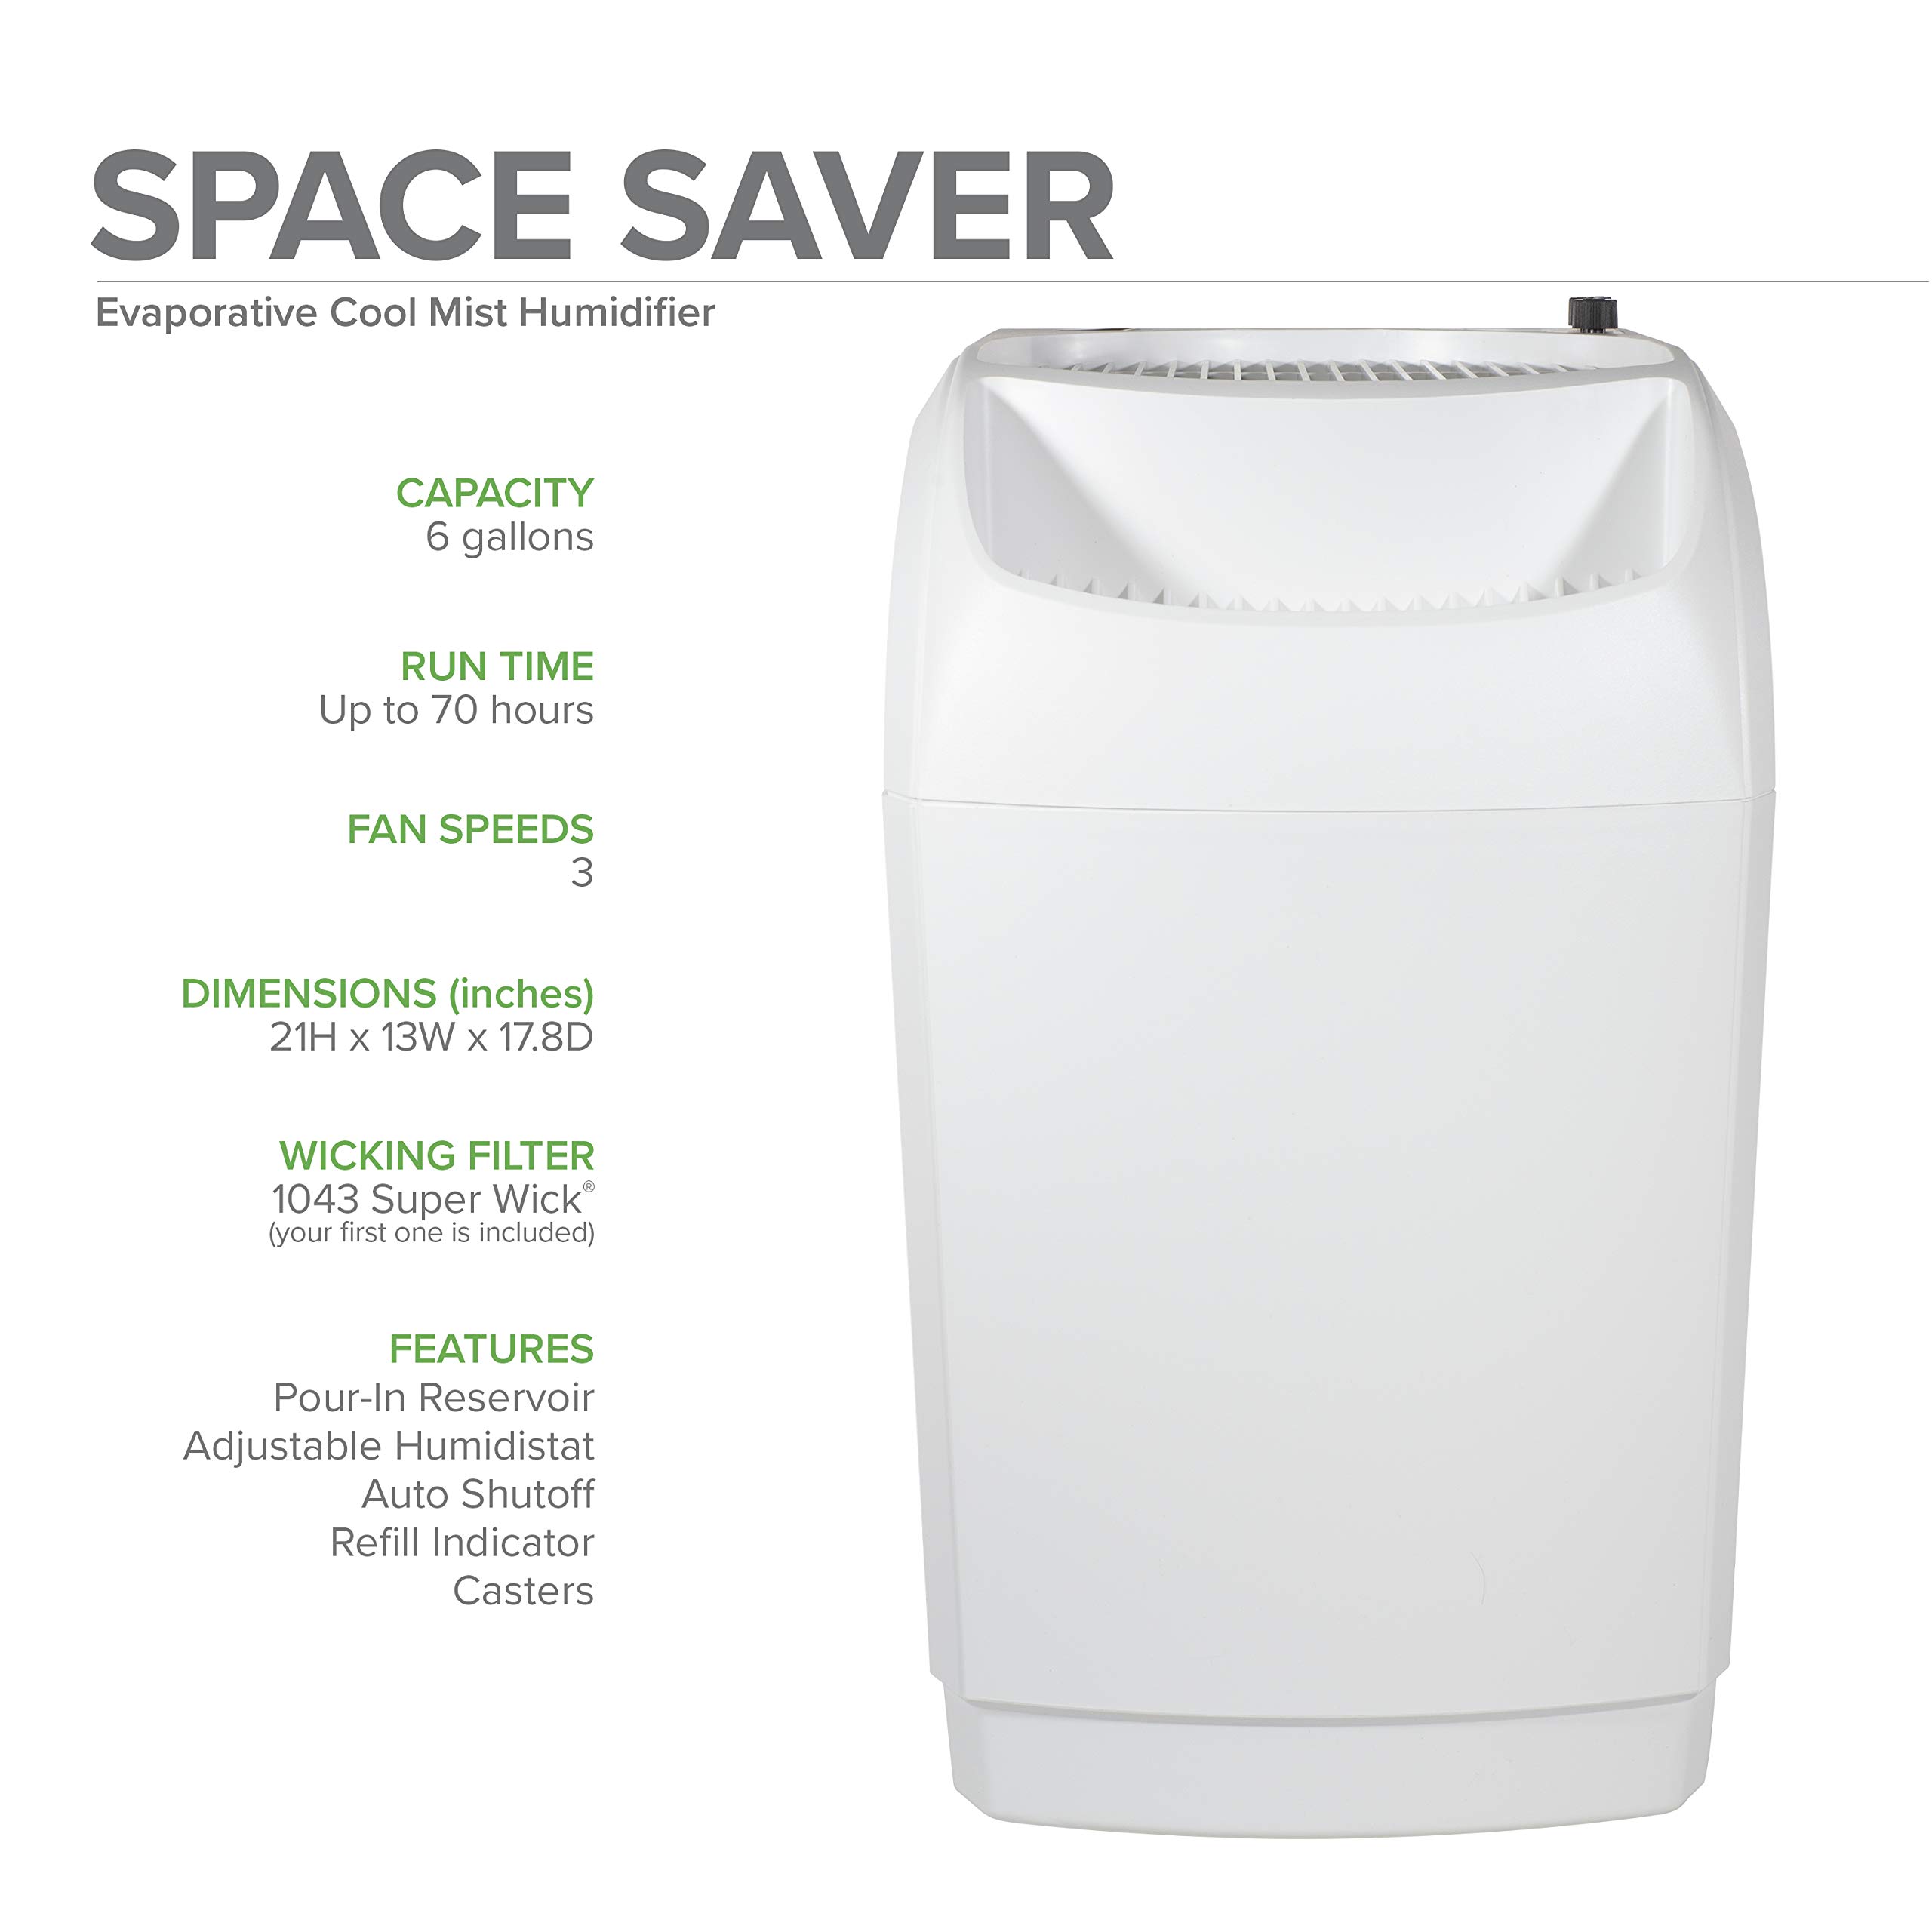 AIRCARE Space-Saver Evaporative Whole House Humidifier (2,300 sq ft)